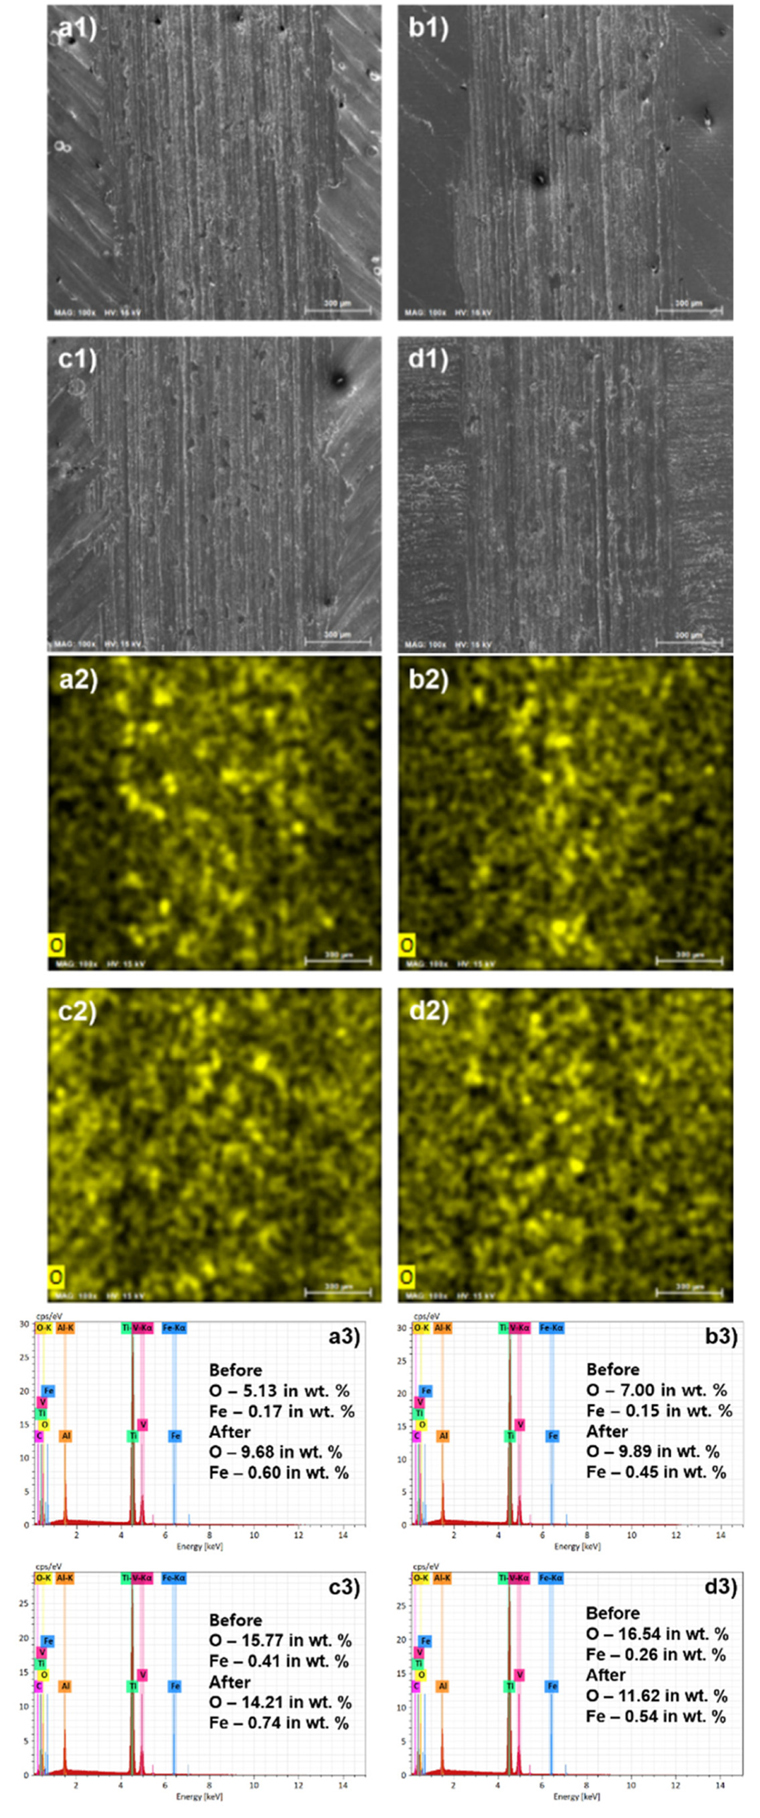 SEM image of selected area of the wear track, O mapping and chemical composition generated on the surface of the RT untreated (a1, a2, a3), RT UNSM-treated (b1, b2, b3), HT400 untreated (c1, c2, c3) and HT400 UNSM-treated (d1, d2, d3).